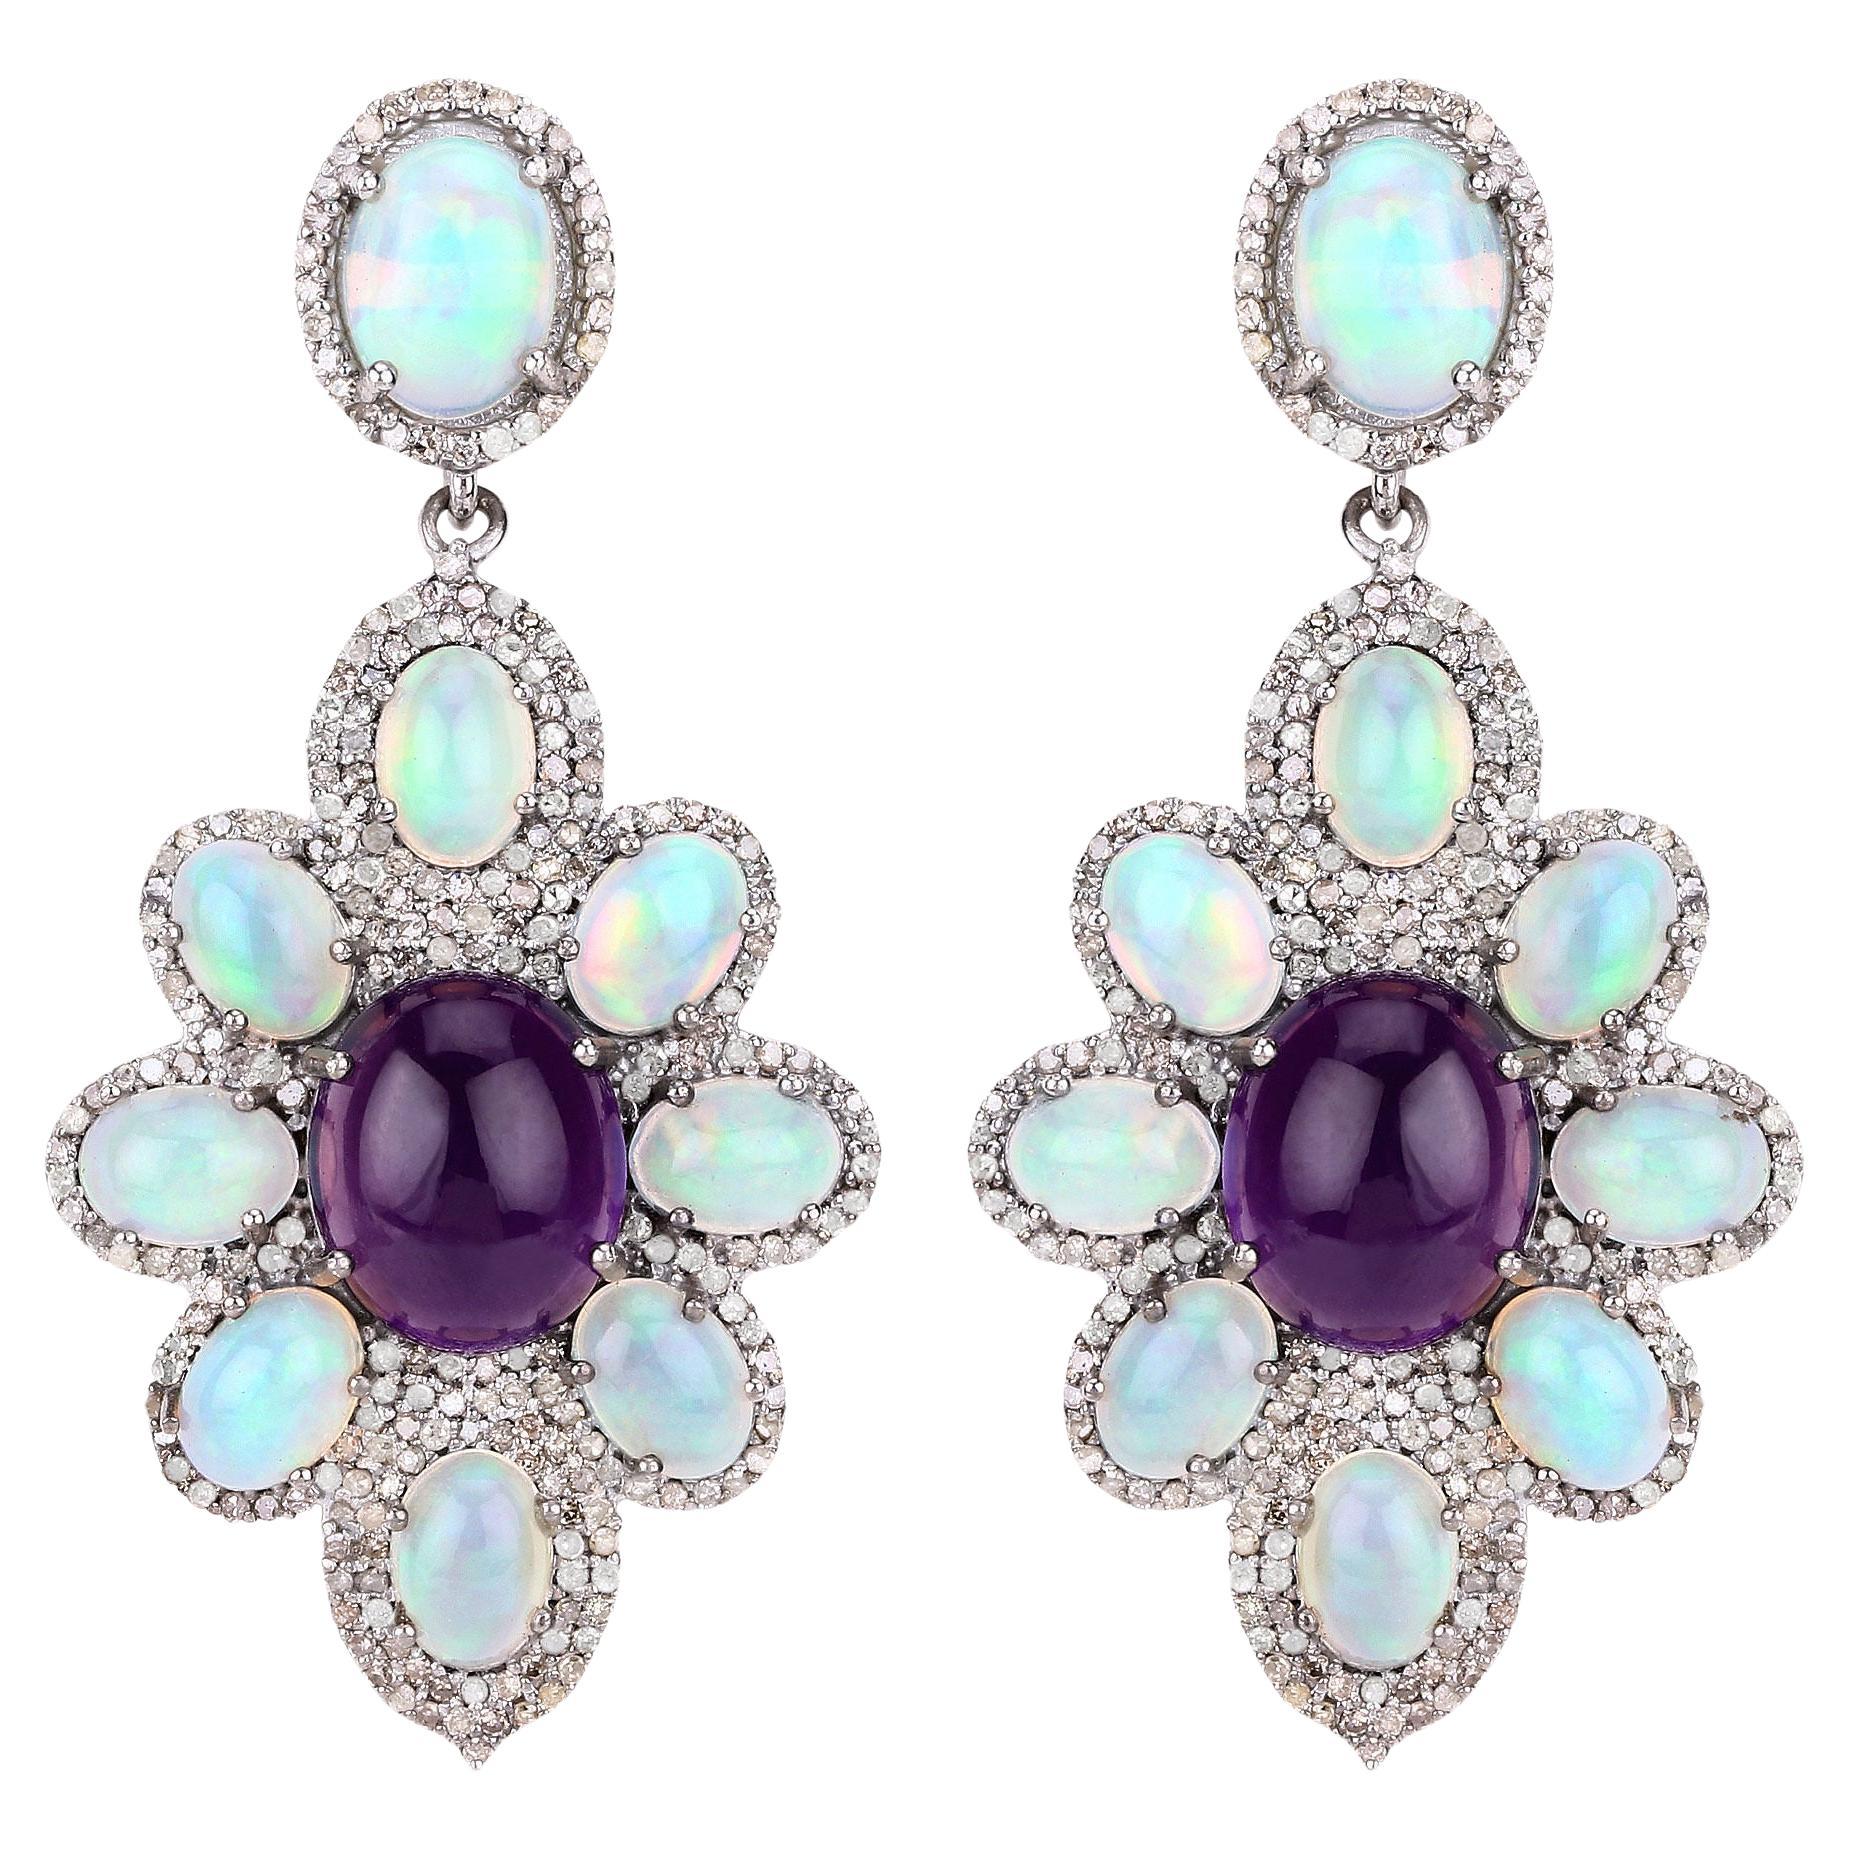 Natural Opal Amethyst and Diamond Statement Earrings 25.5 Carats Total